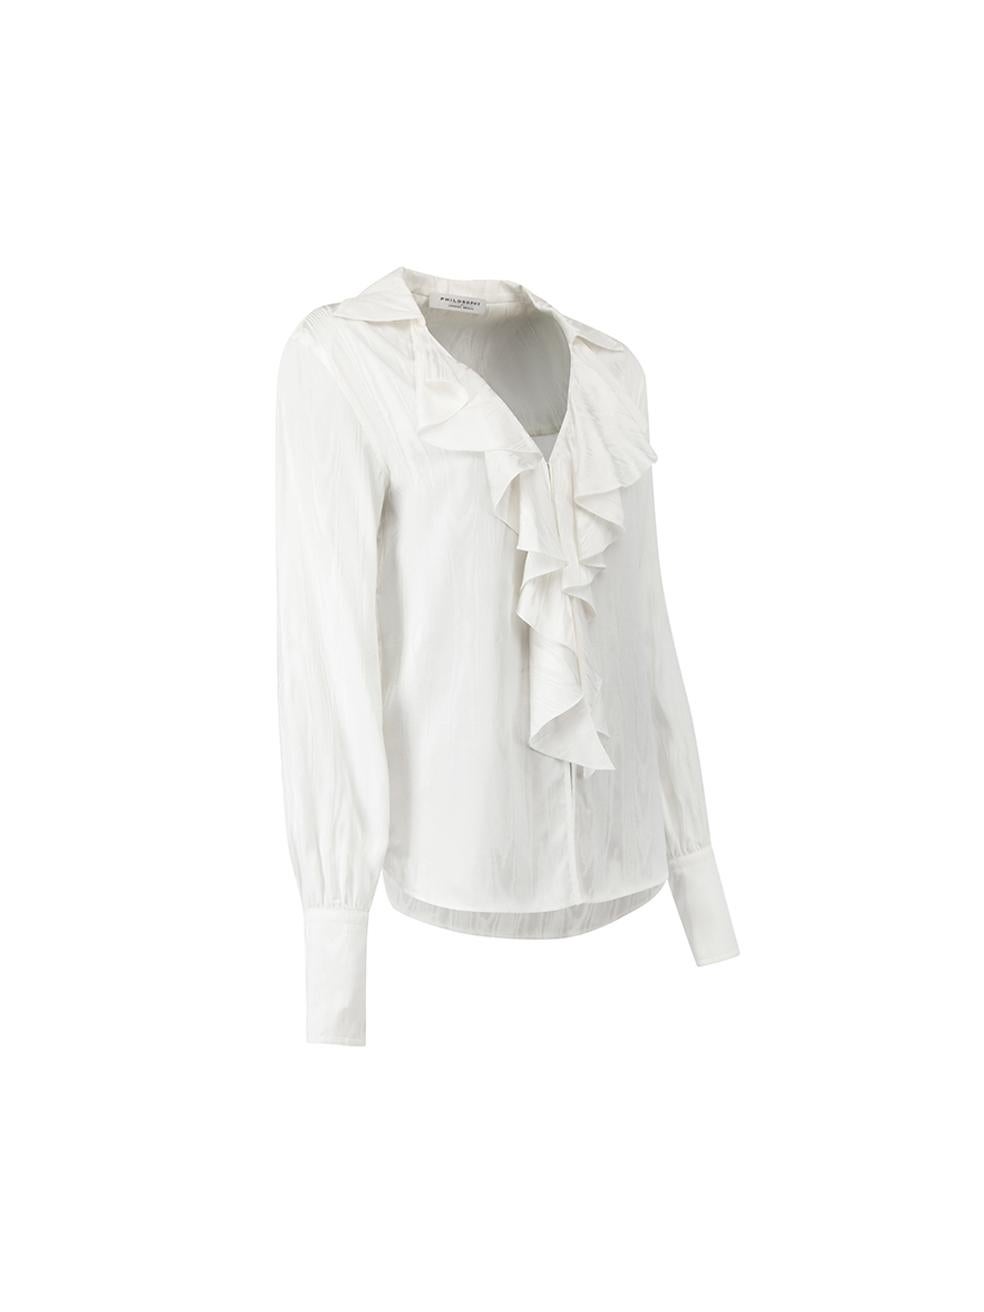 CONDITION is Never worn, with tags. No visible wear to blouse is evident on this new Philosophy di Lorenzo Serafini designer resale item. 



Details


White

Viscose

Long sleeves blouse

Wood grain embossed pattern

Ruffles accent

V